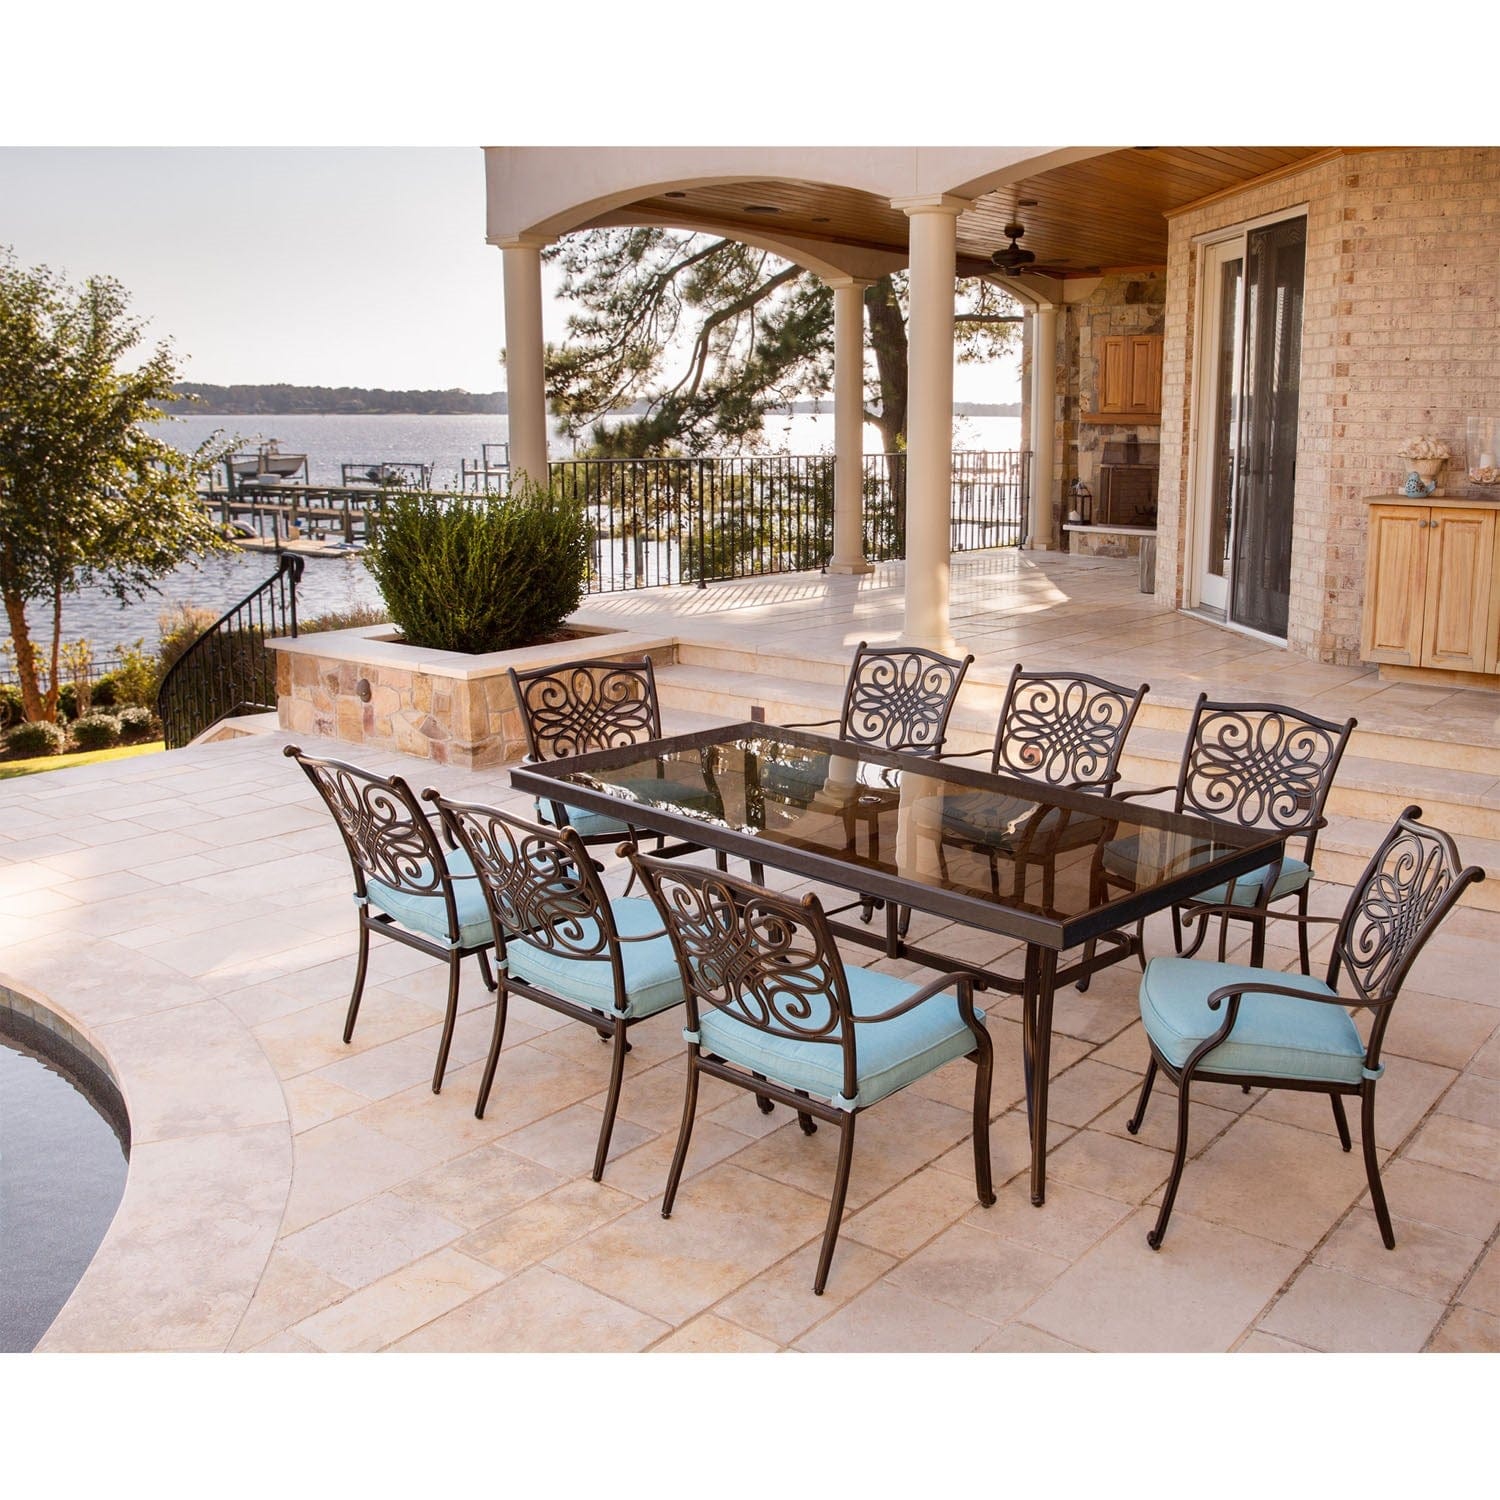 Hanover Outdoor Dining Set Hanover - Traditions 9-Piece Dining Set in Blue with Extra-Long 84 x 41 In. Glass-Top Dining Table - TRADDN9PCG-BLU